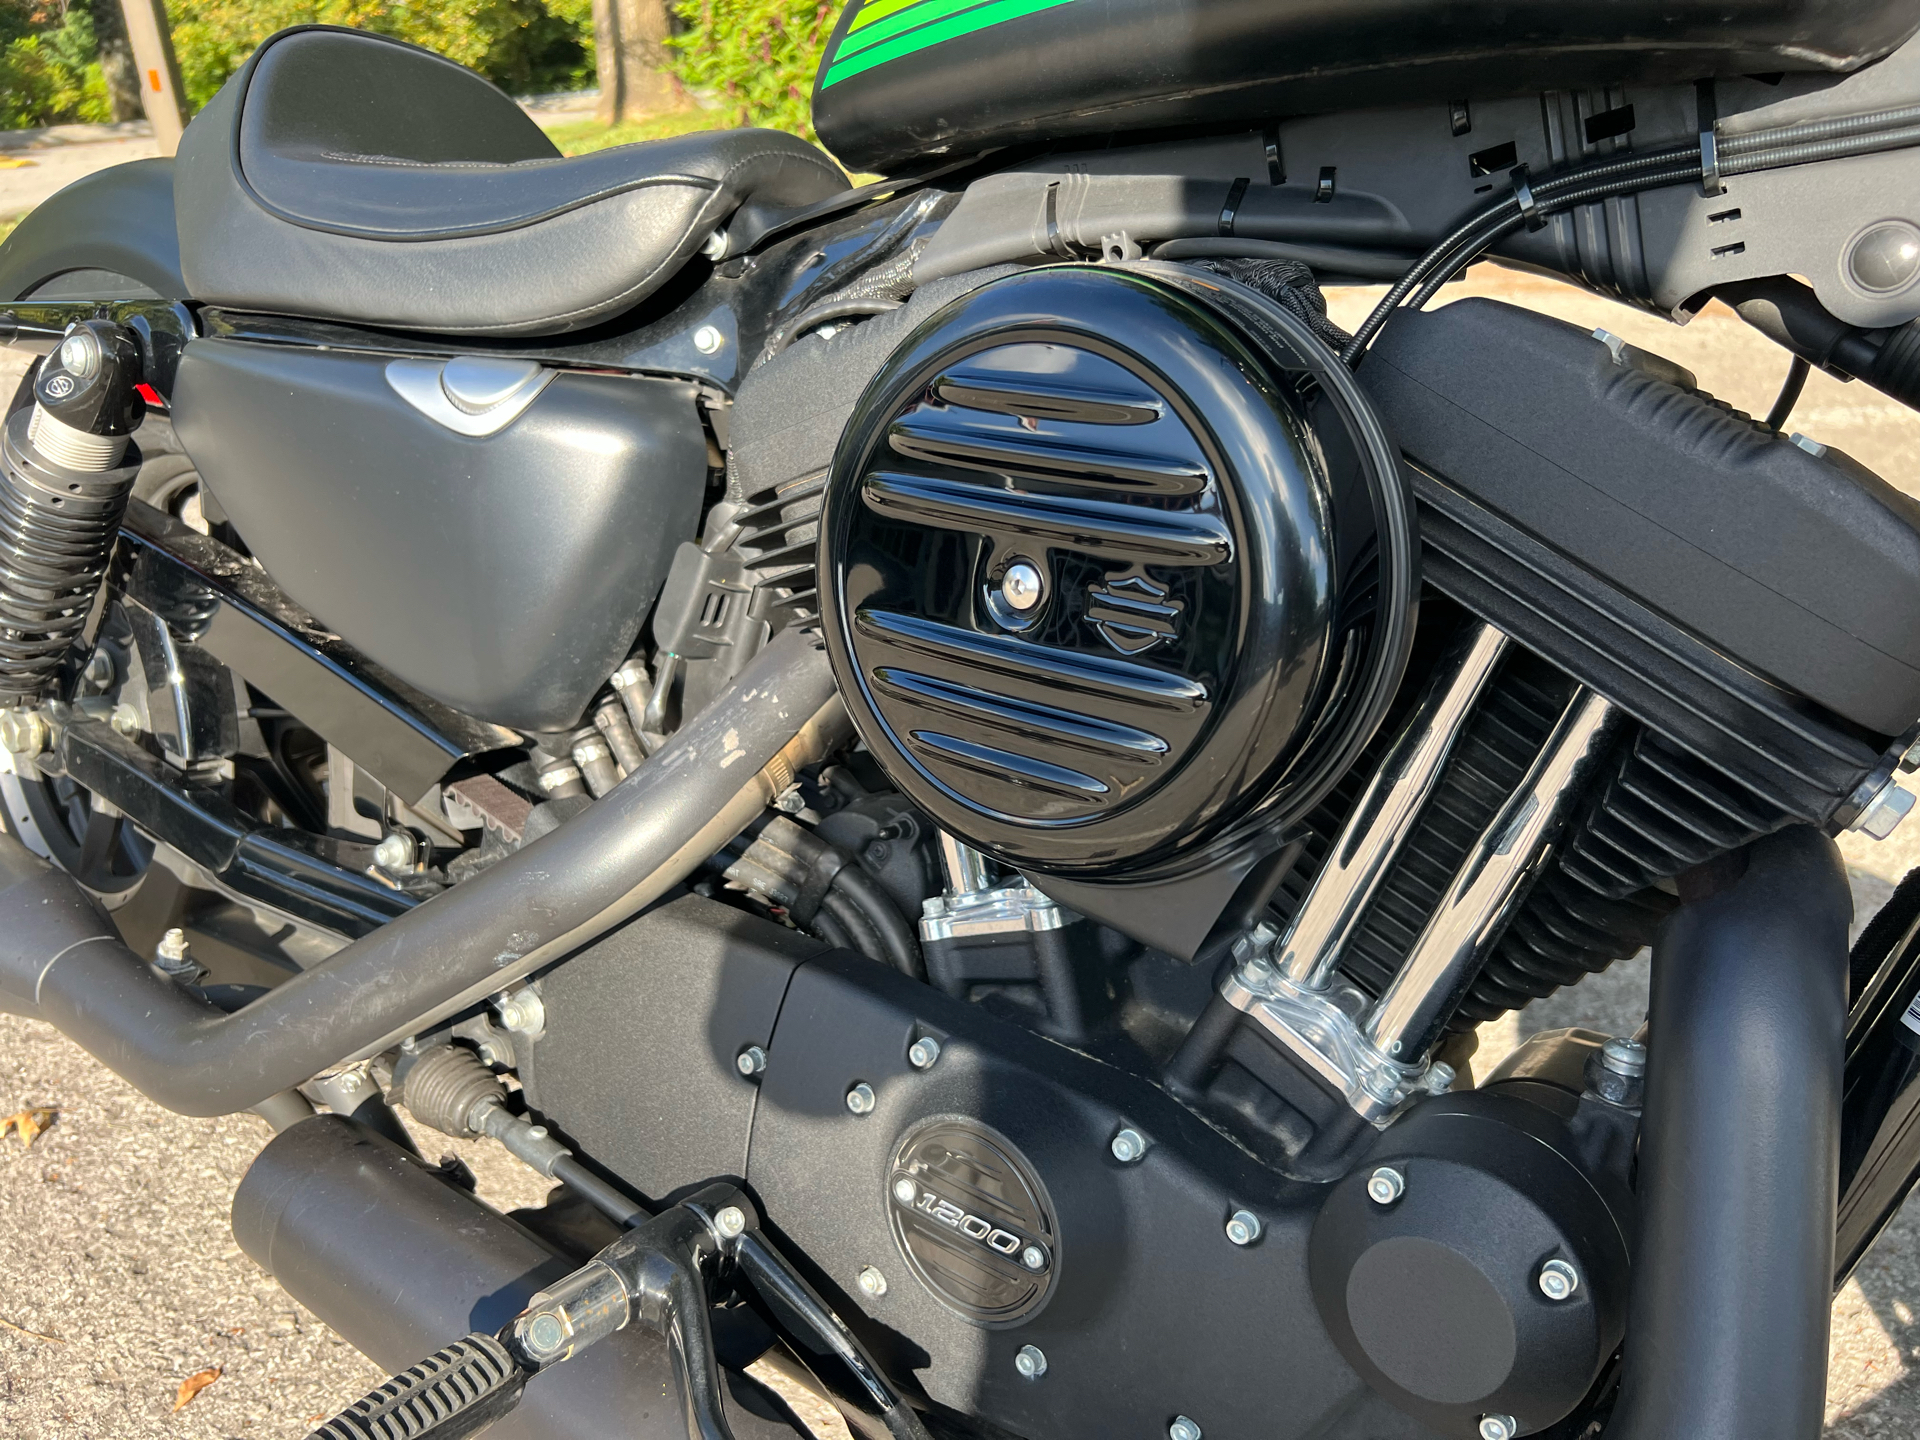 2021 Harley-Davidson Iron 1200™ in Franklin, Tennessee - Photo 2